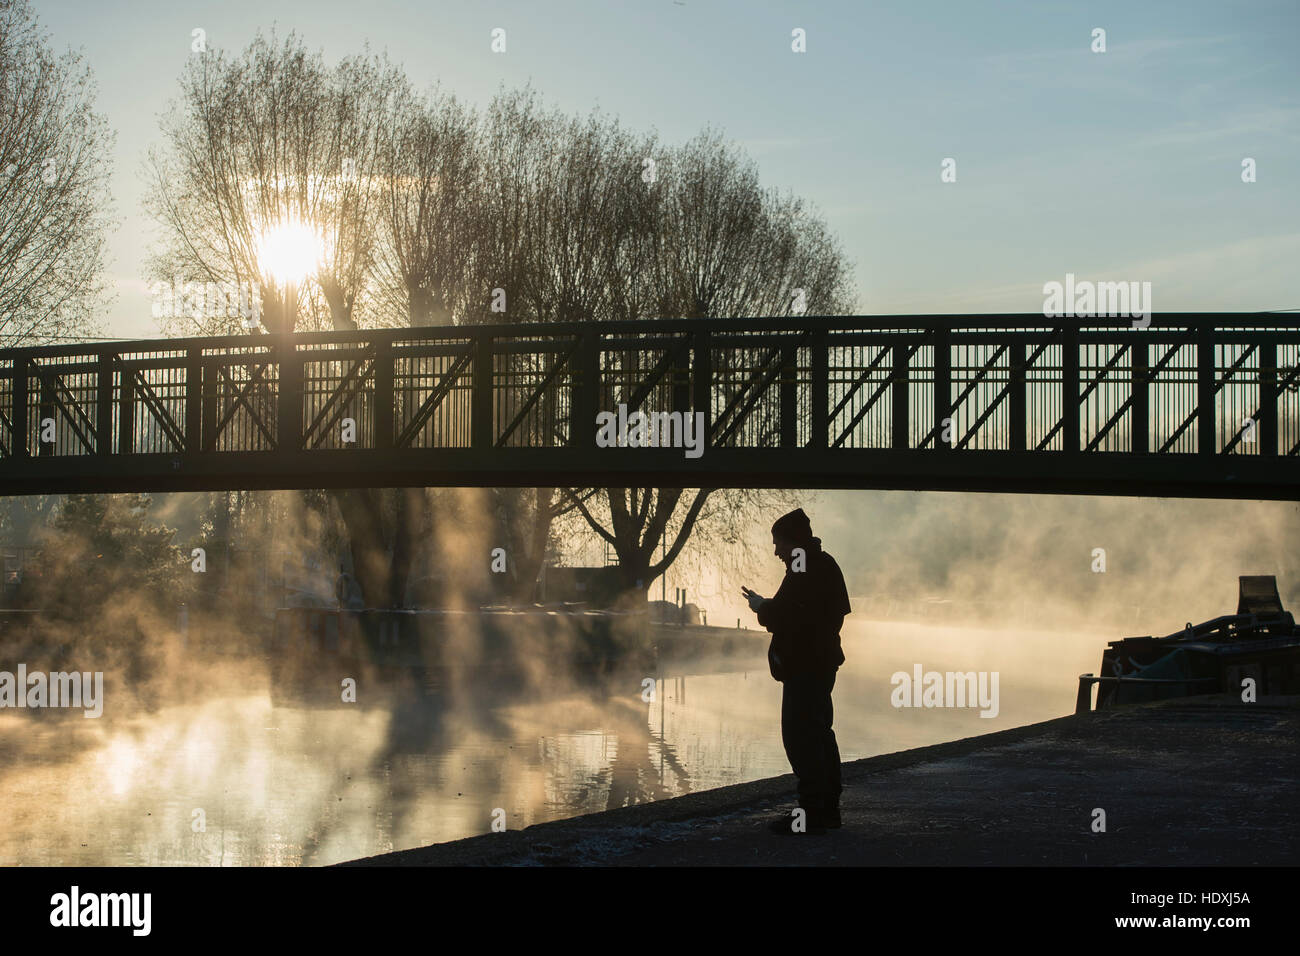 30th November, 2016. London, UK.  A man looks at his phone by the River Lea in Tottenham, London, on a cold misty morning. Photo: David Mirzoeff/ Alam Stock Photo